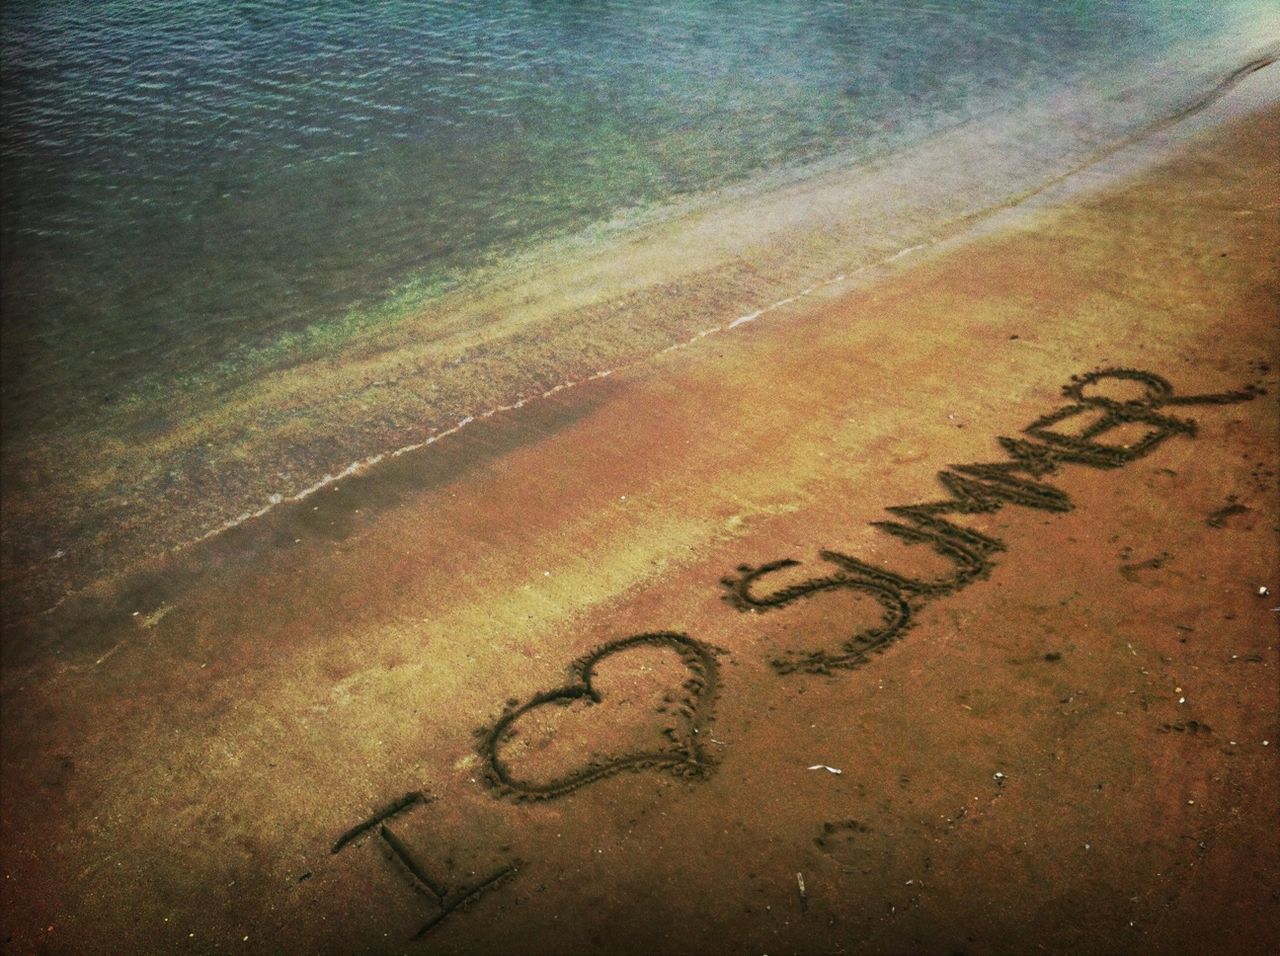 beach, sand, water, sea, text, shore, western script, high angle view, communication, footprint, tranquility, nature, outdoors, wave, surf, no people, tranquil scene, day, coastline, capital letter